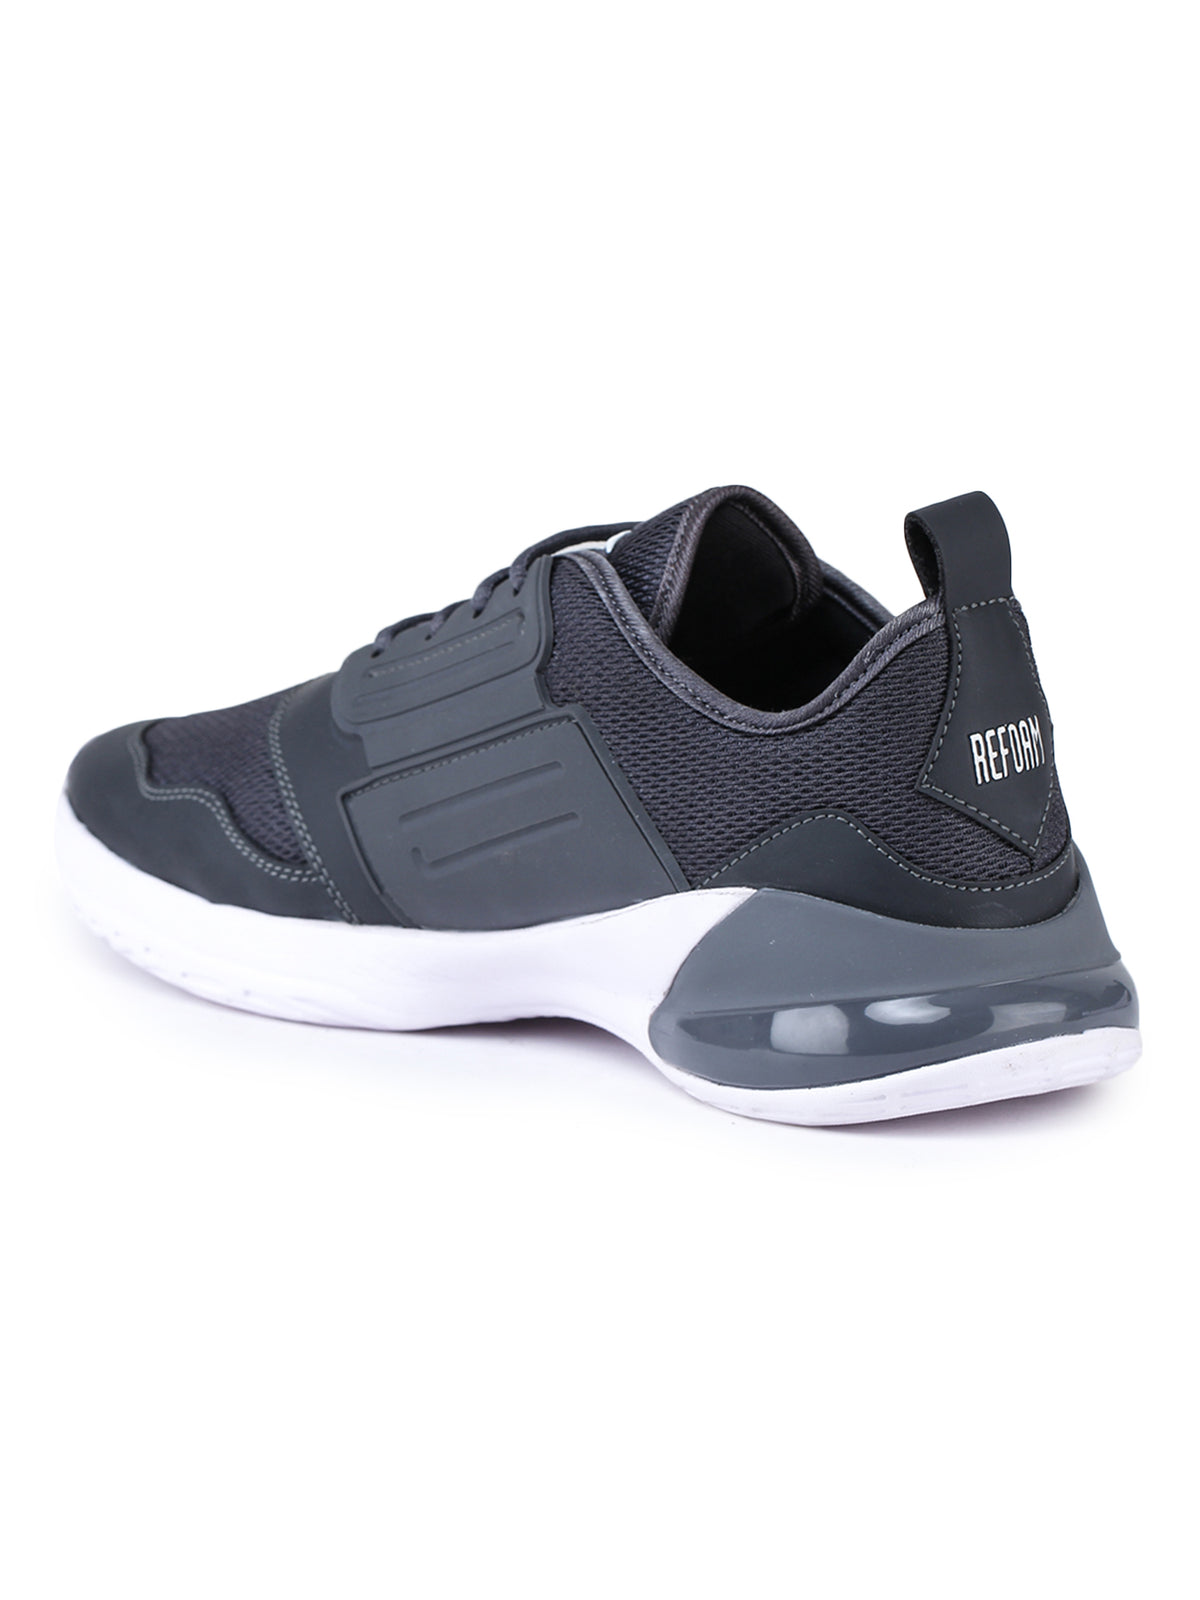 Grey Solid Mesh Lace Up Running Sport Shoes For Men